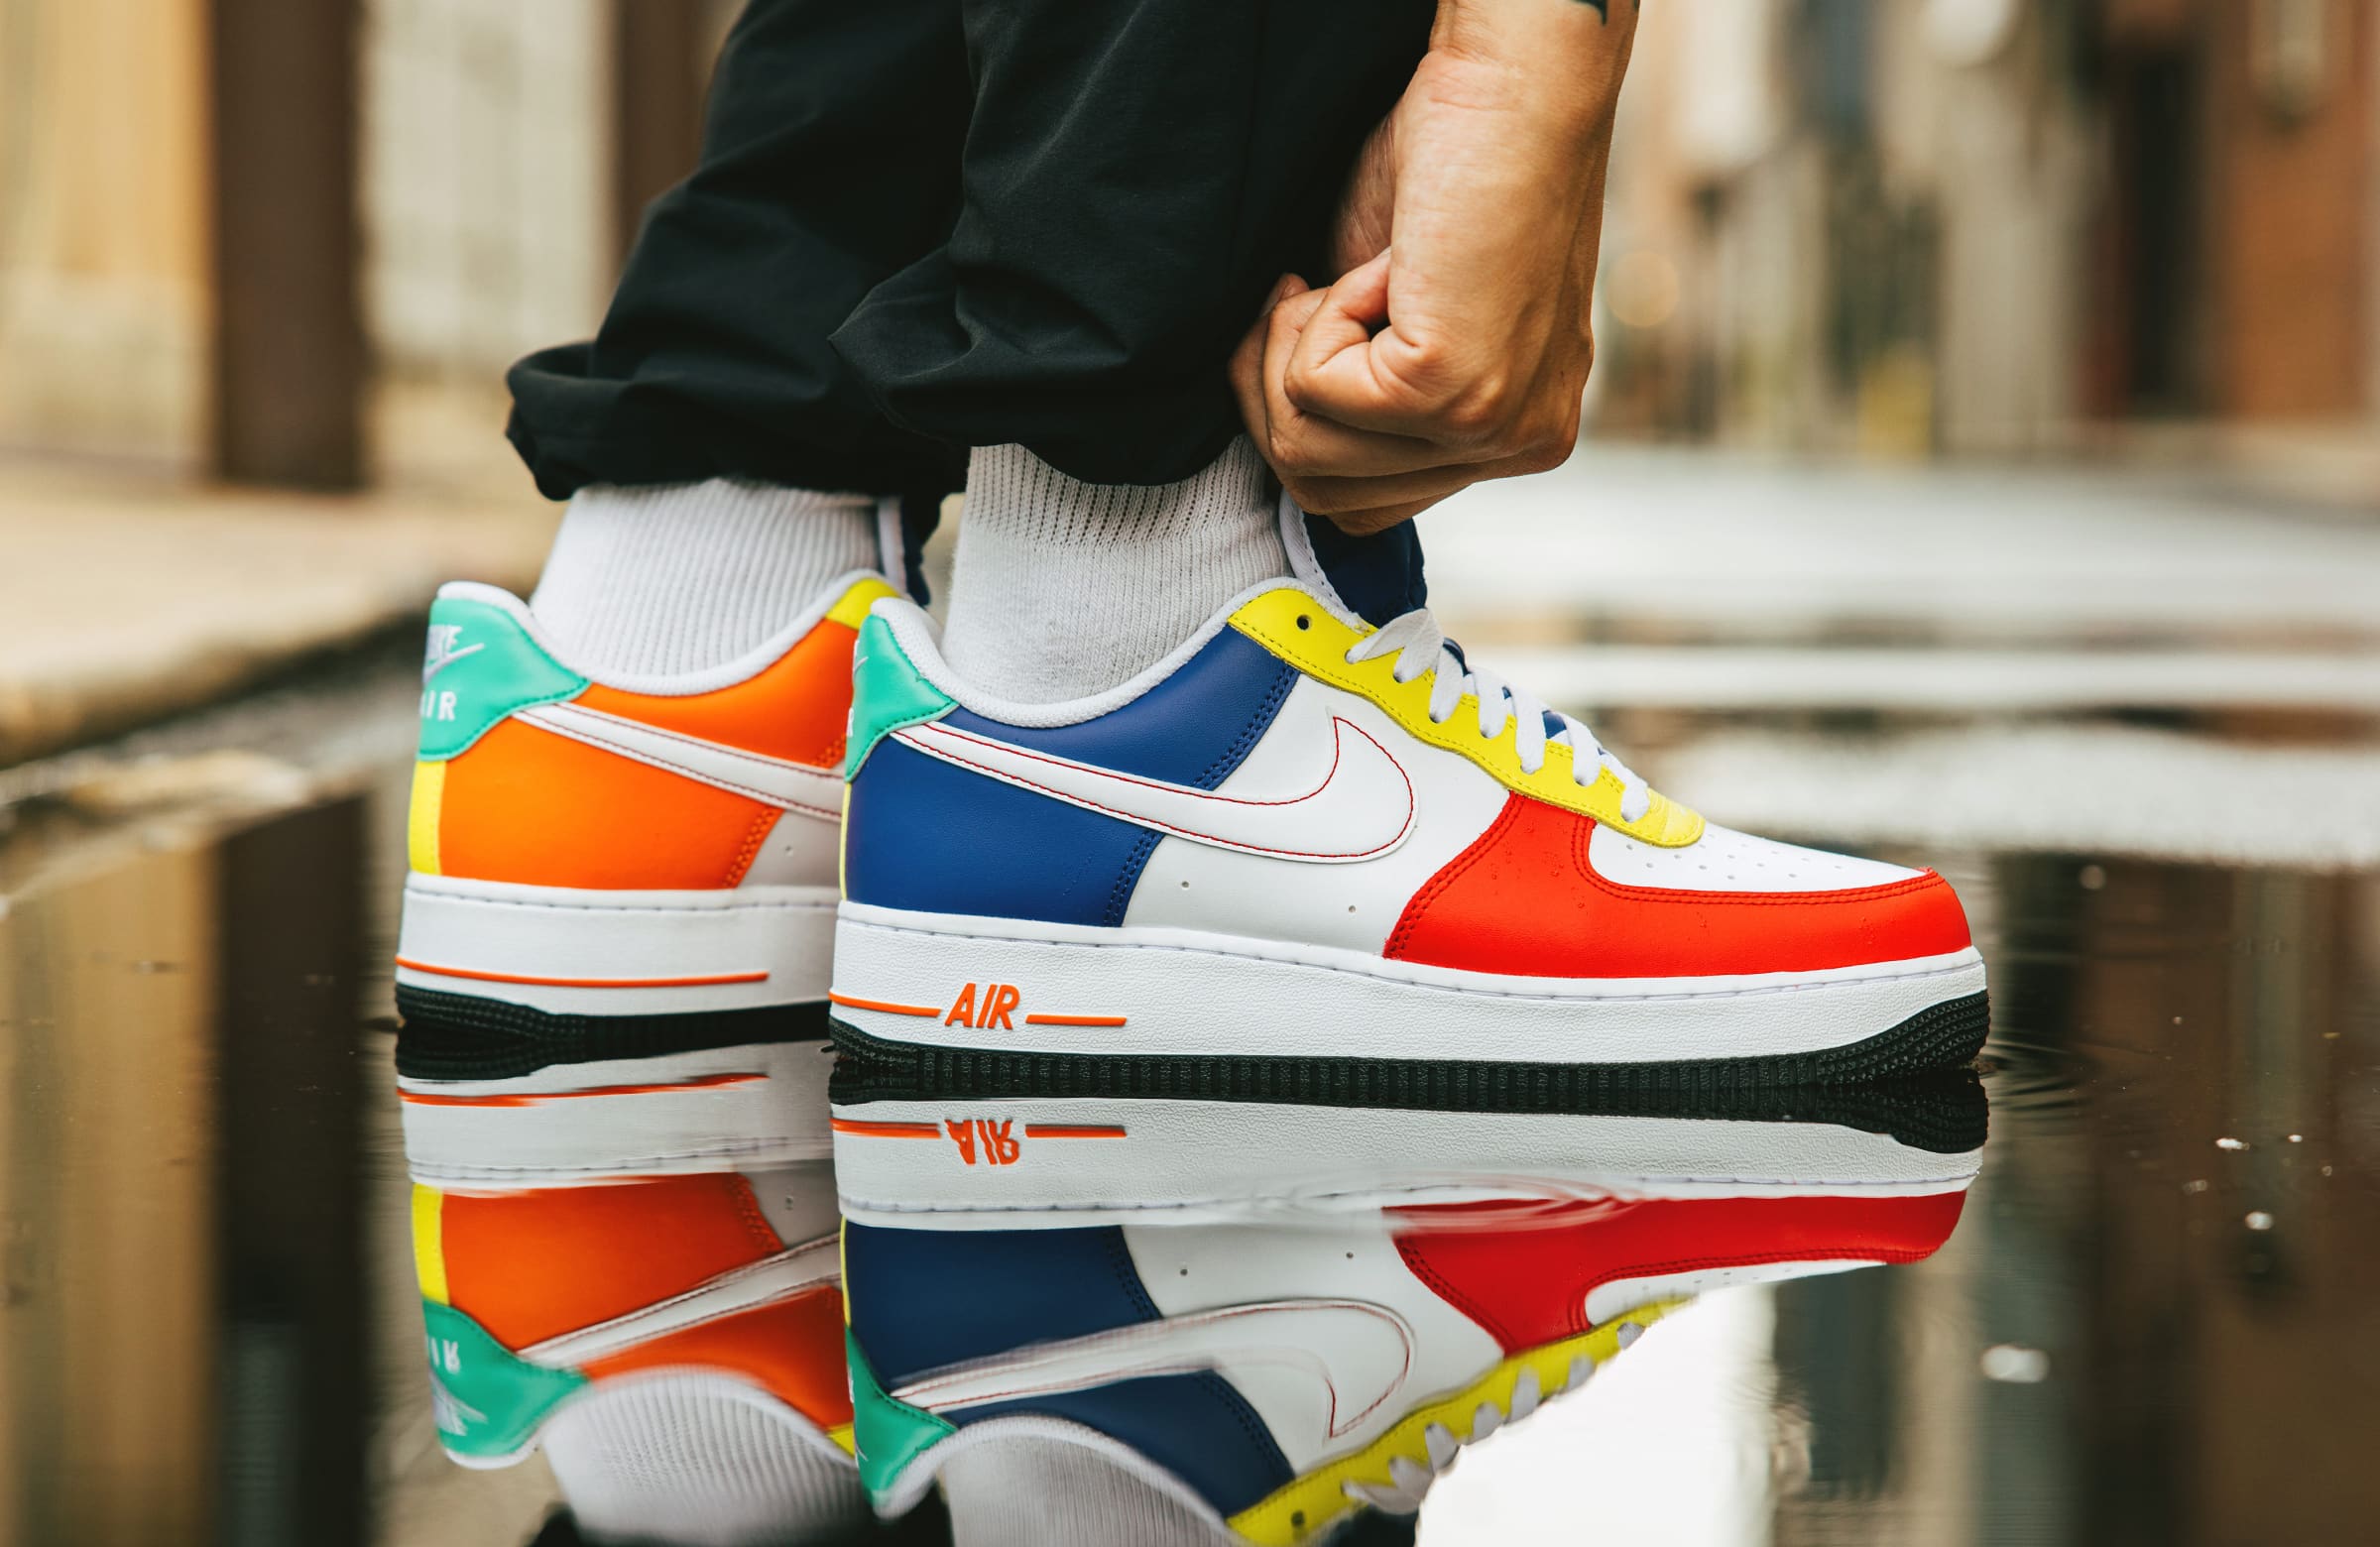 aanval roltrap Conclusie Can you Solve the “Rubik's Cube” Nike Air Force 1 Low? – DTLR